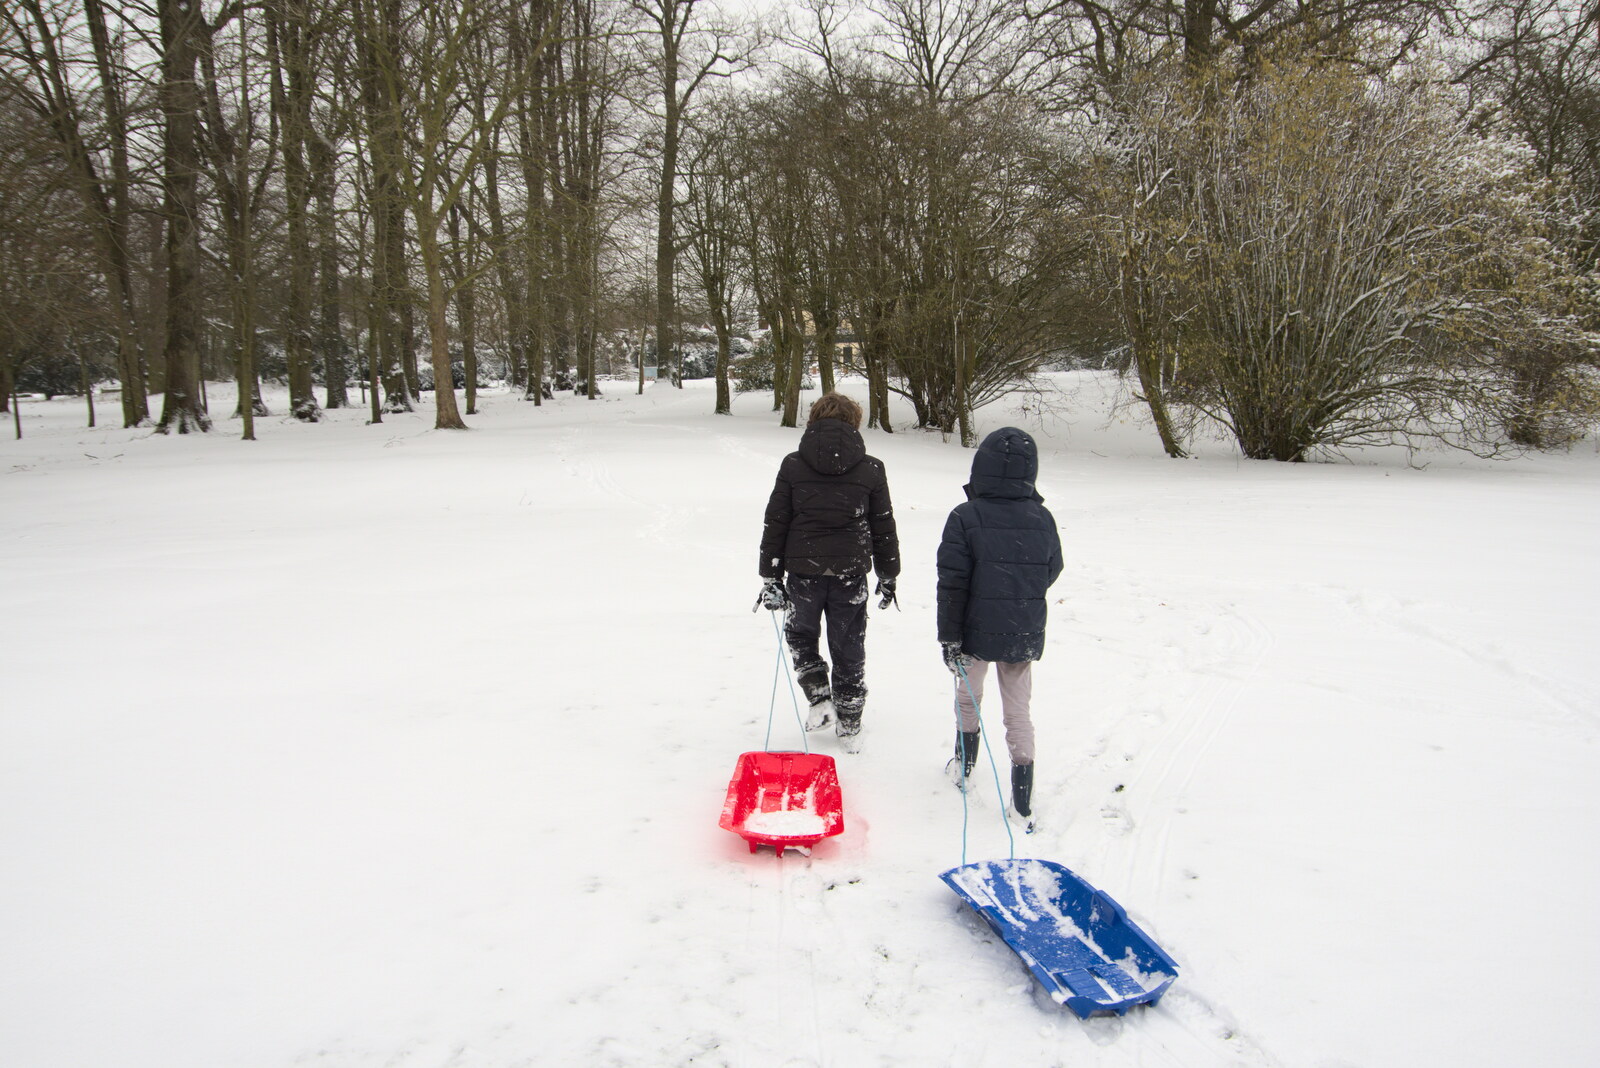 Dragging the sledges back home from Beast From The East Two - The Sequel, Brome, Suffolk - 8th February 2021